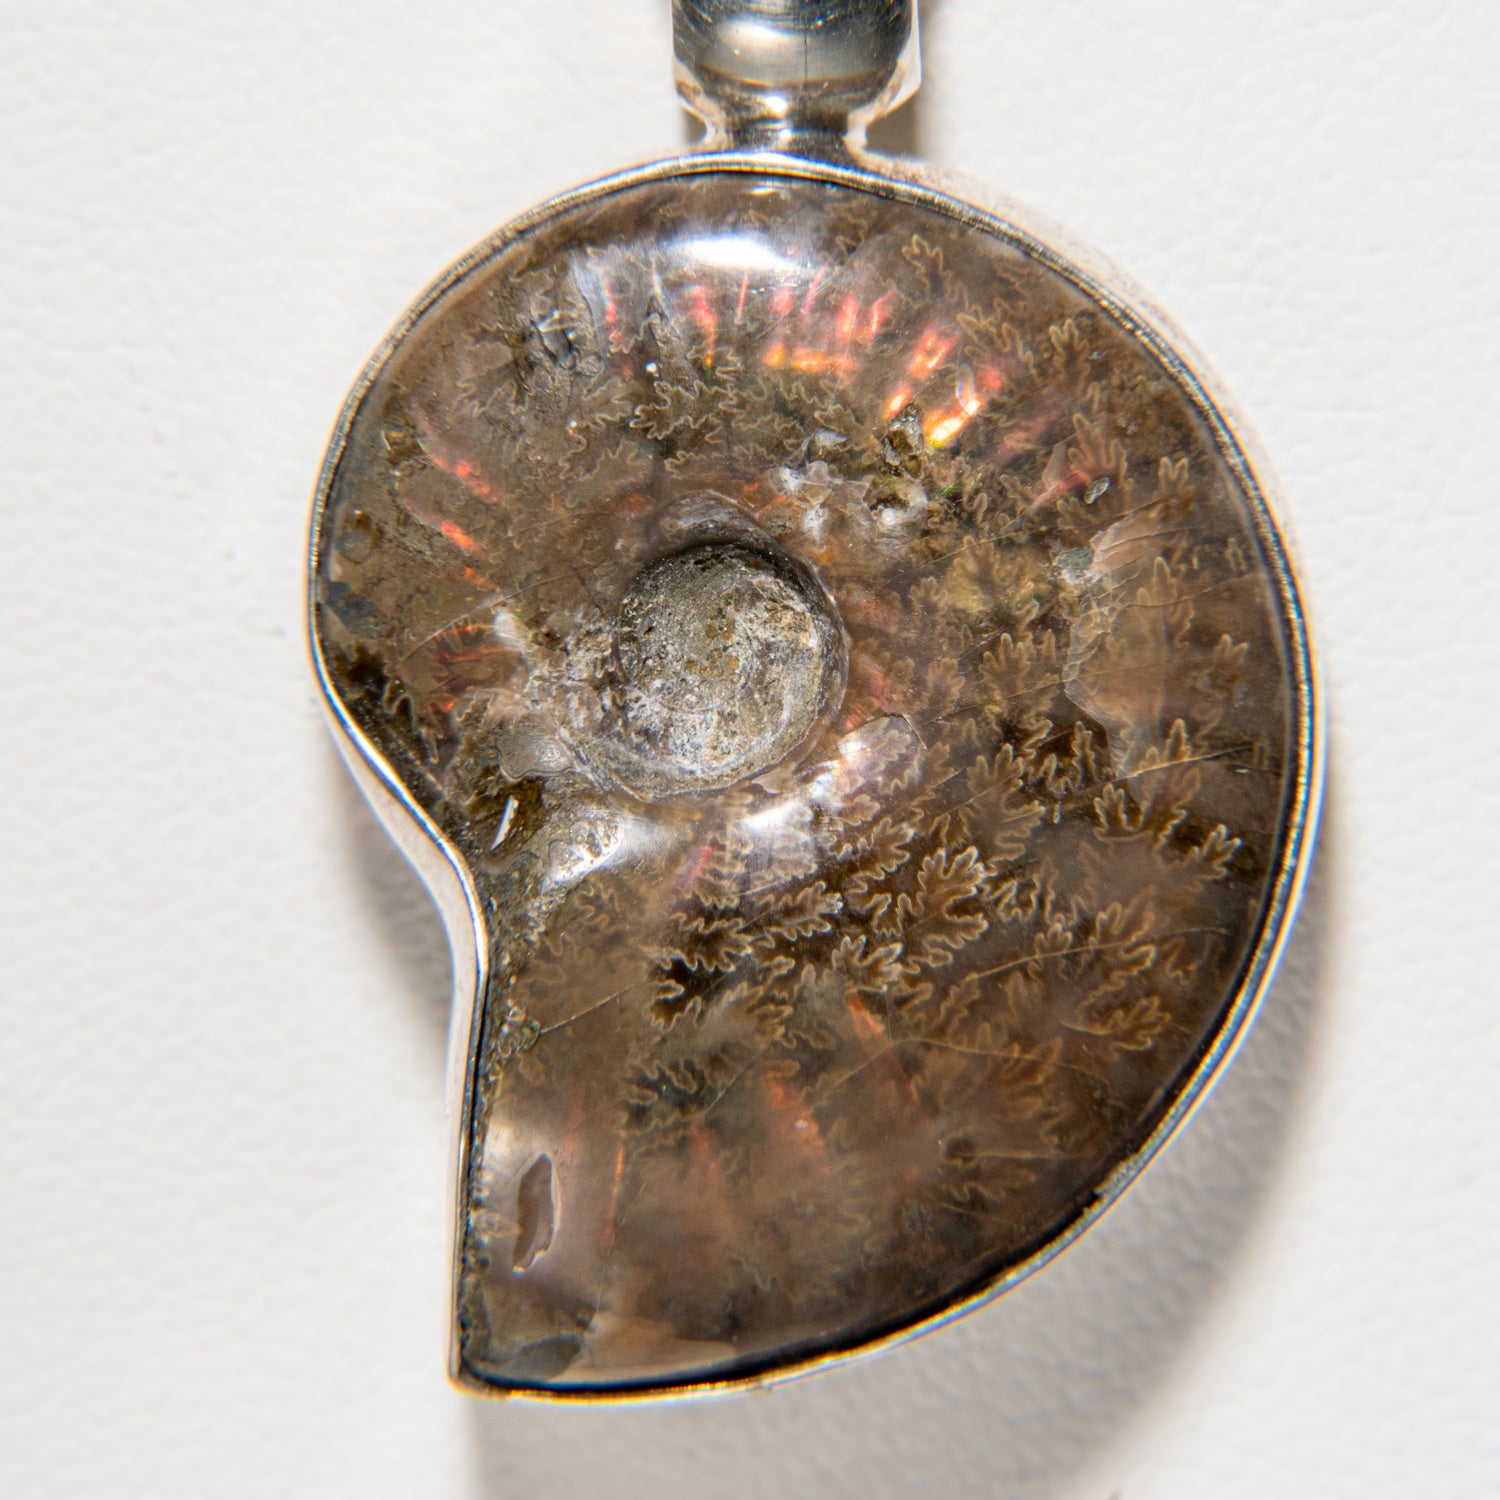 Genuine Opalized Ammonite Pendant with Sterling Silver Chain Necklace